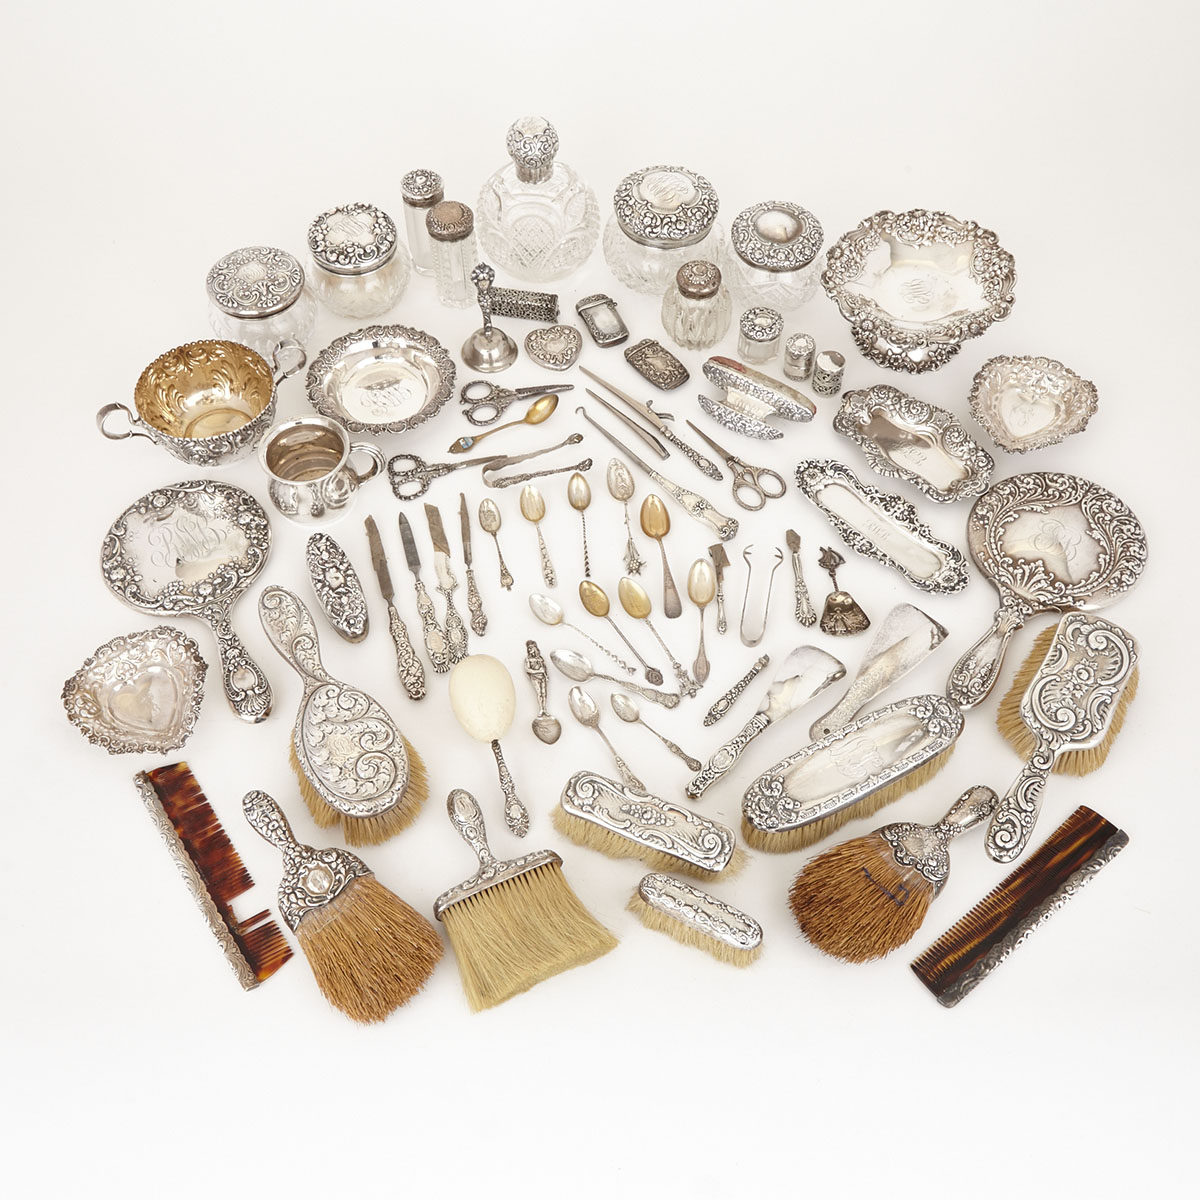 Grouped Lot of Mainly English and North American Silver, late 19th/20th century